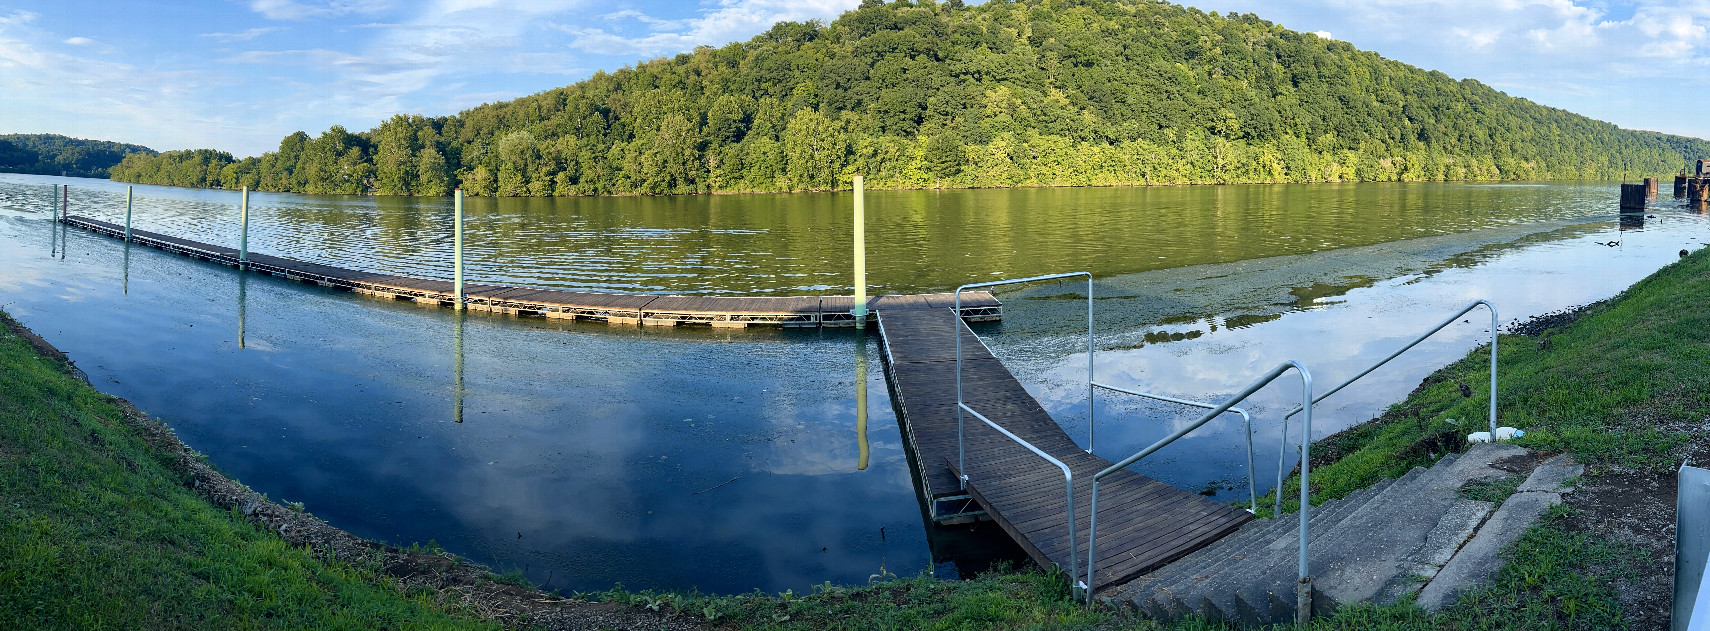 A panorama of the Monongahela River, taken from the lower town